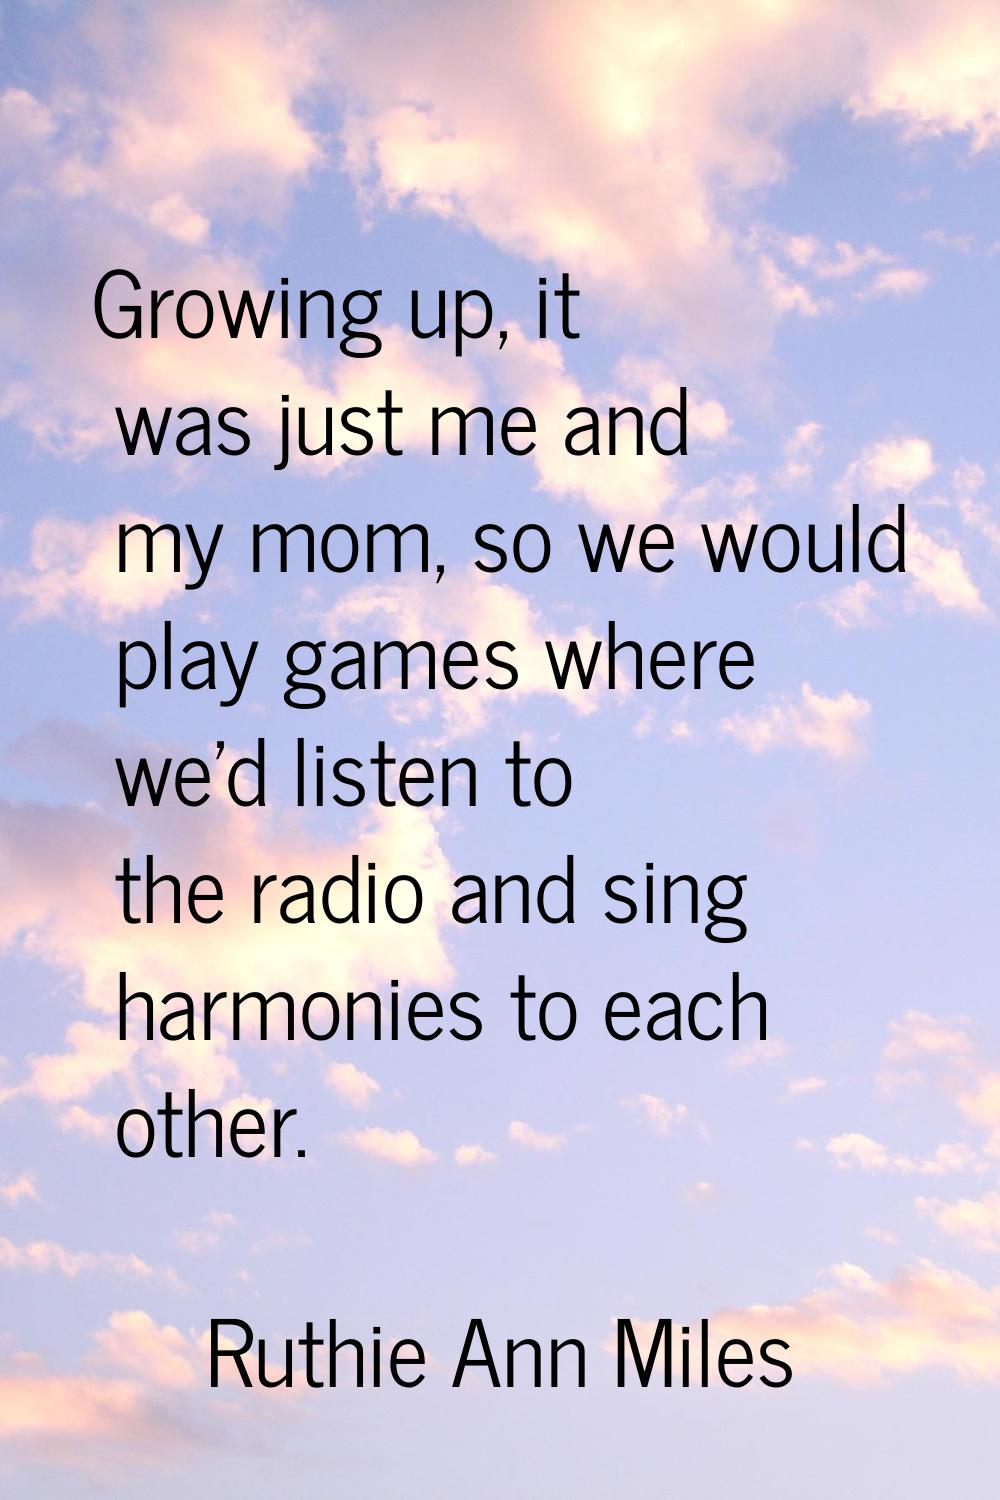 Growing up, it was just me and my mom, so we would play games where we'd listen to the radio and si